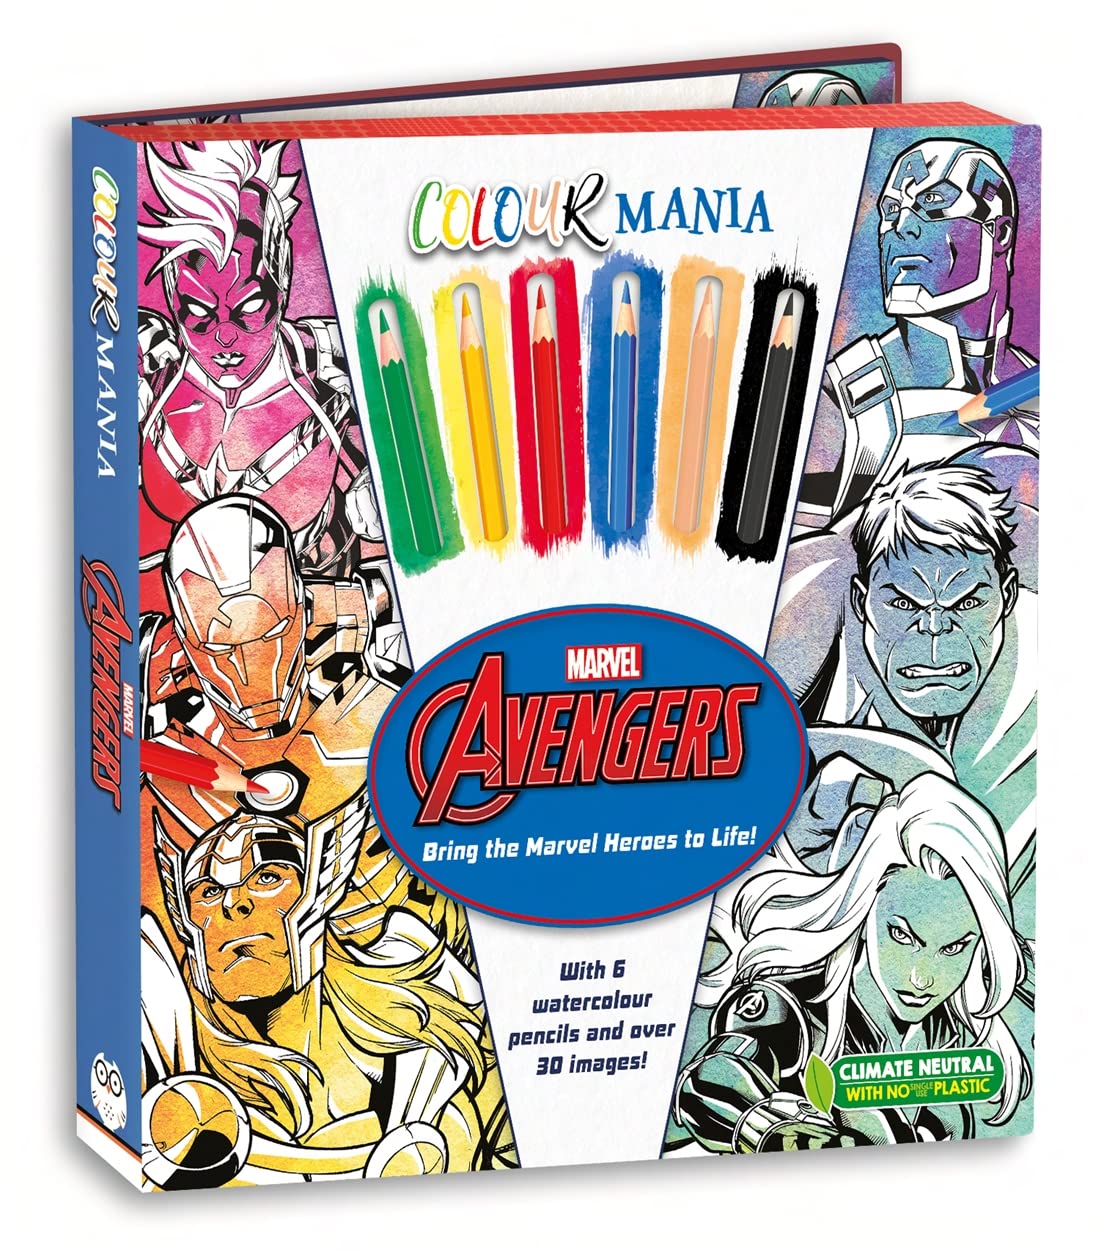 Marvel: Avengers (Colouring Book and Pencil Set) [Paperback]